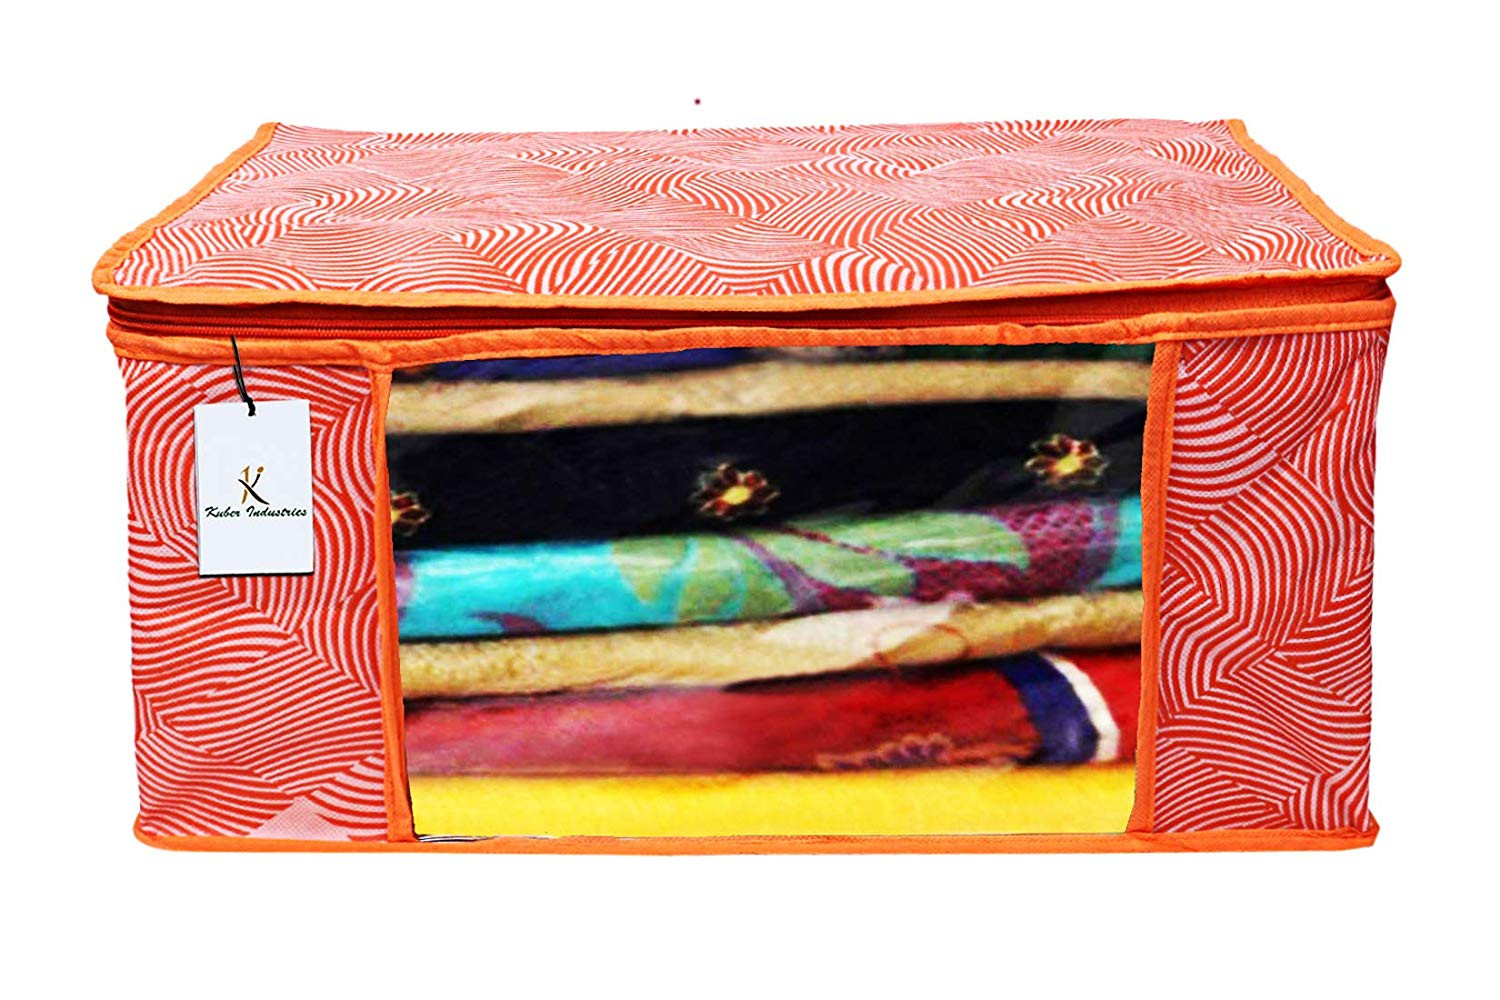 Kuber Industries Laheriya Printed Non Woven Saree Cover And Underbed Storage Bag, Cloth Organizer For Storage, Blanket Cover Combo Set (Orange) -CTKTC38691